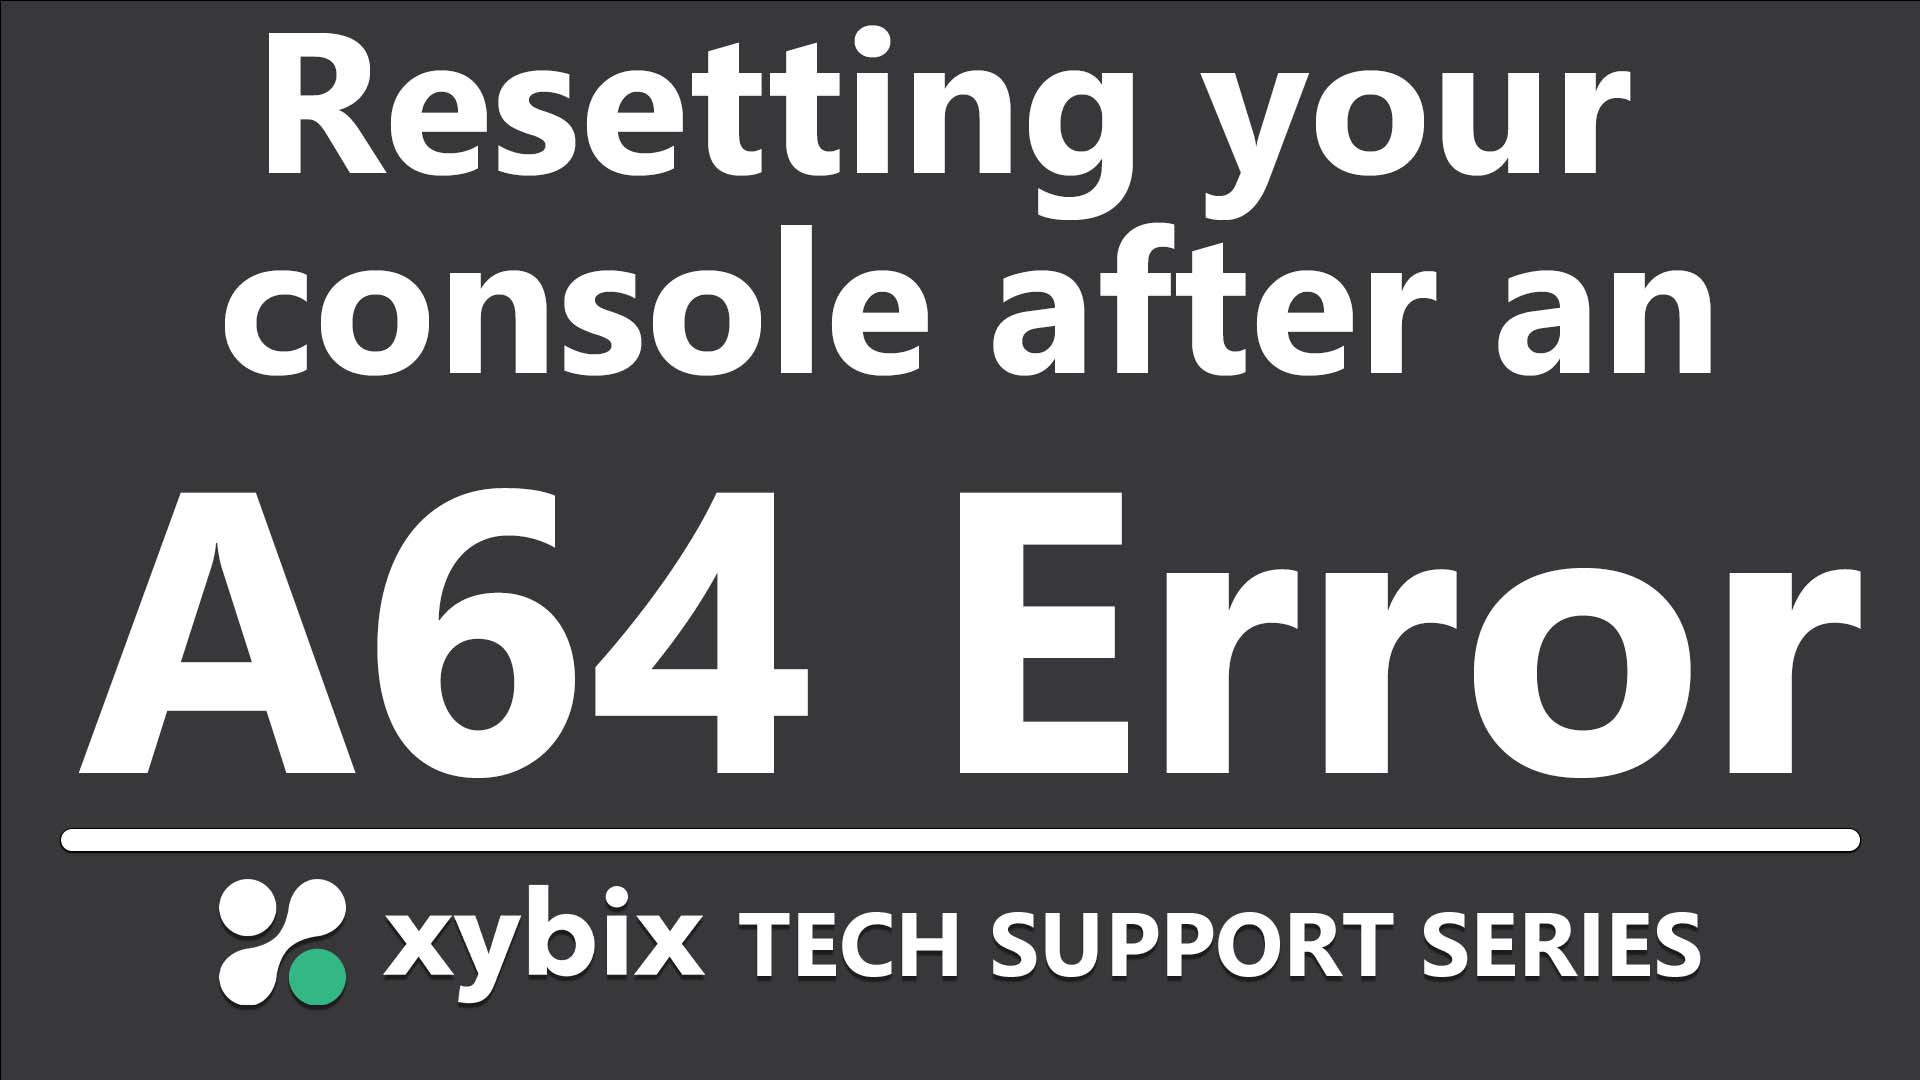 Resetting Your Desk after an A64 Error